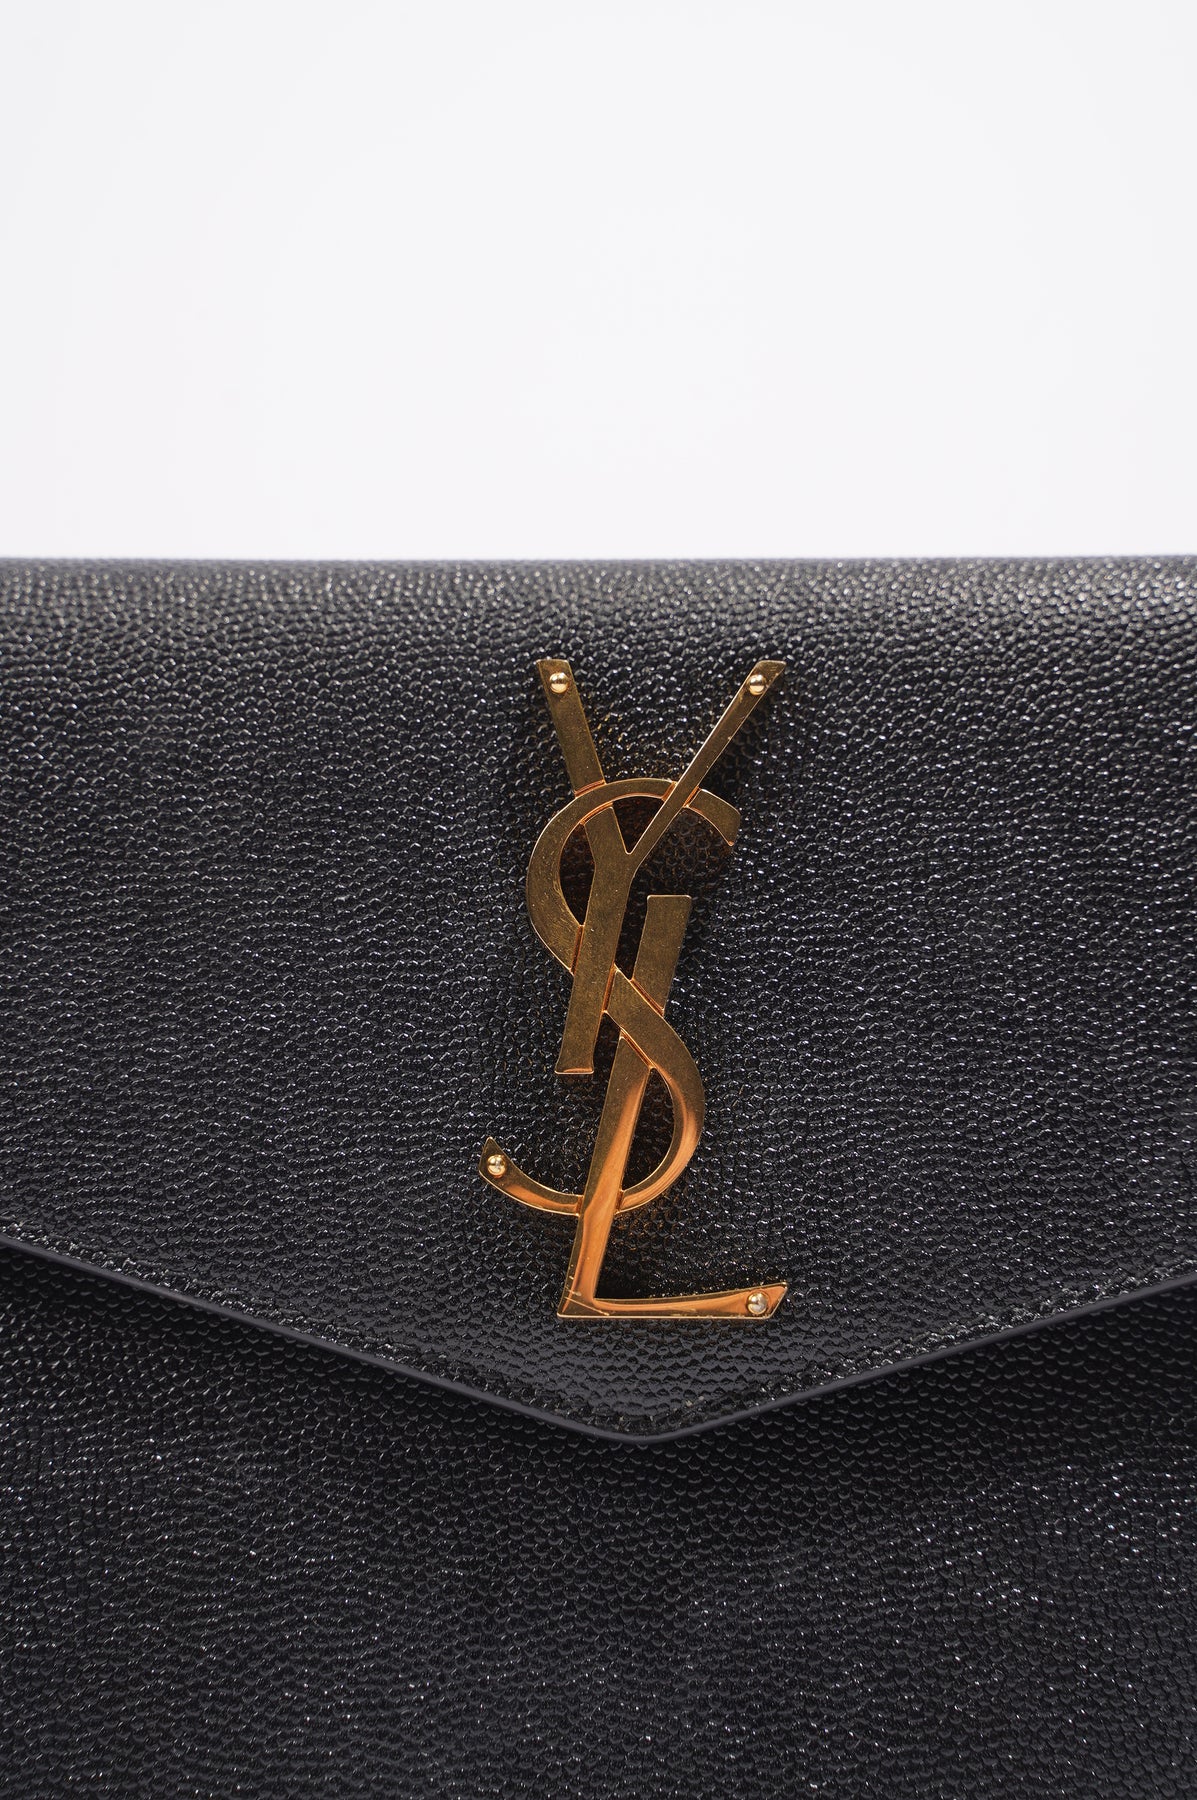 Saint Laurent Uptown Pouch Black Leather – Luxe Collective